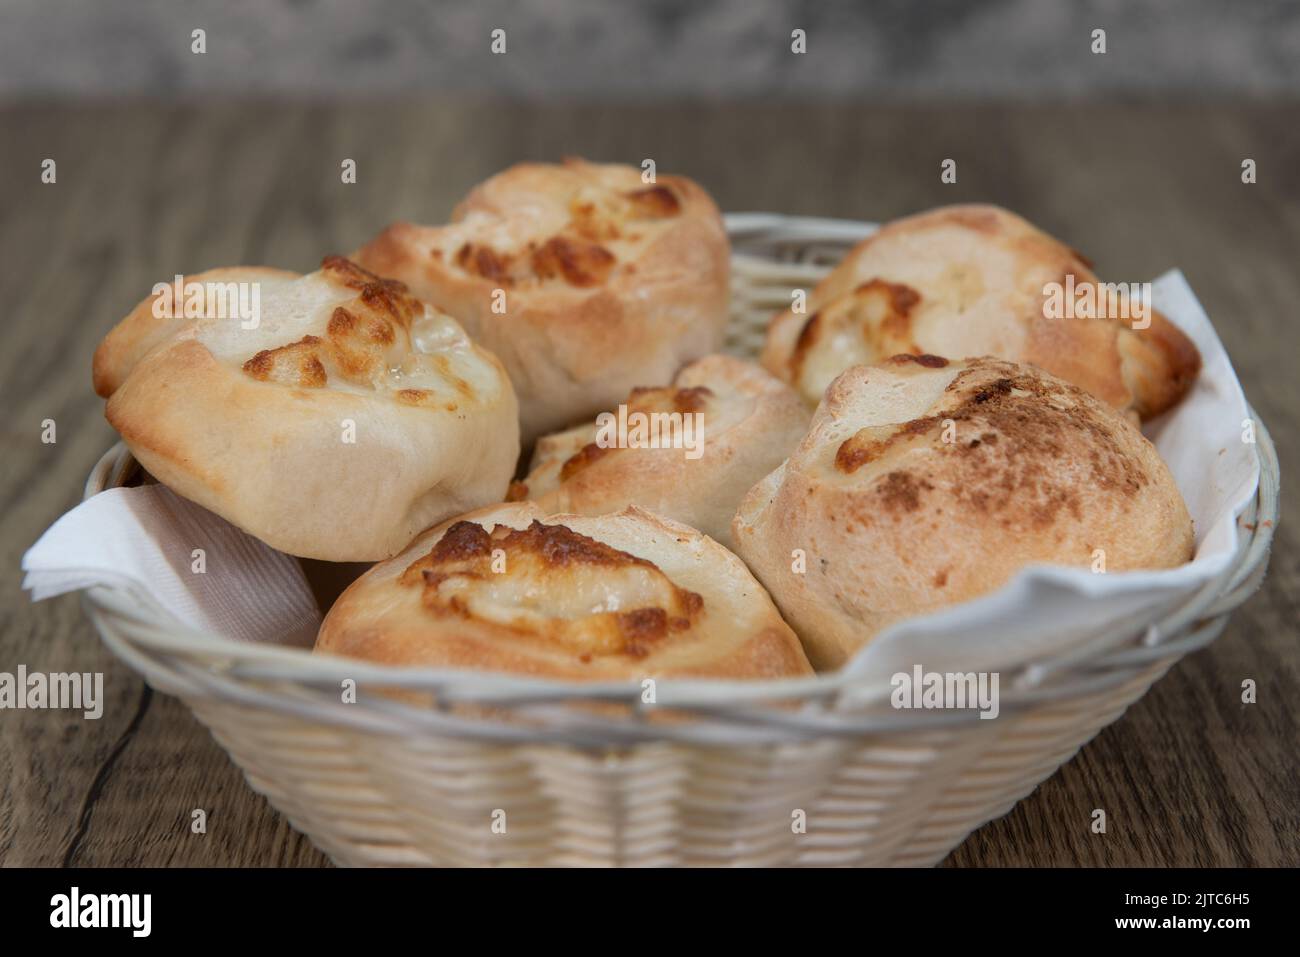 Full basket of garlic and cheese rolls makes the perfect appetizer before an Italian food meal. Stock Photo